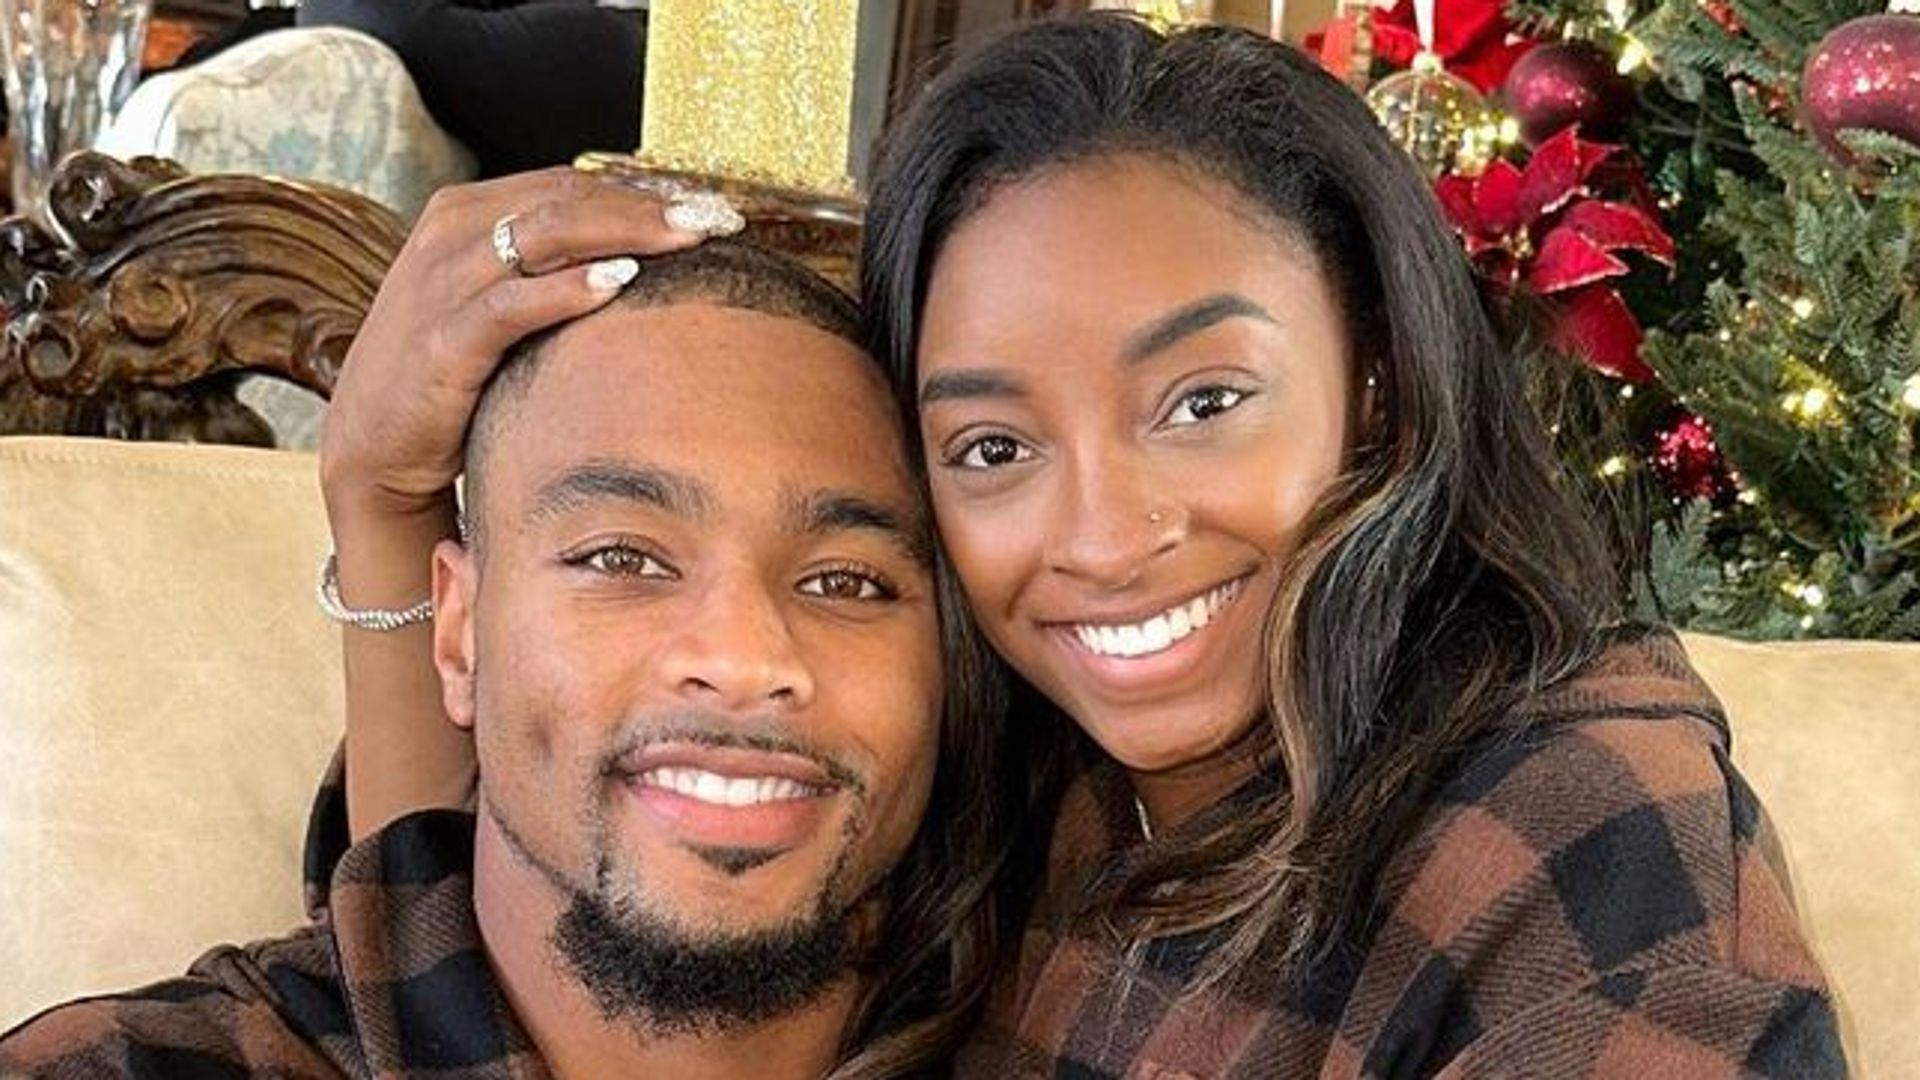 Simone Biles says 'I do' as she marries NFL star Jonathan Owens in stunning bridal gown